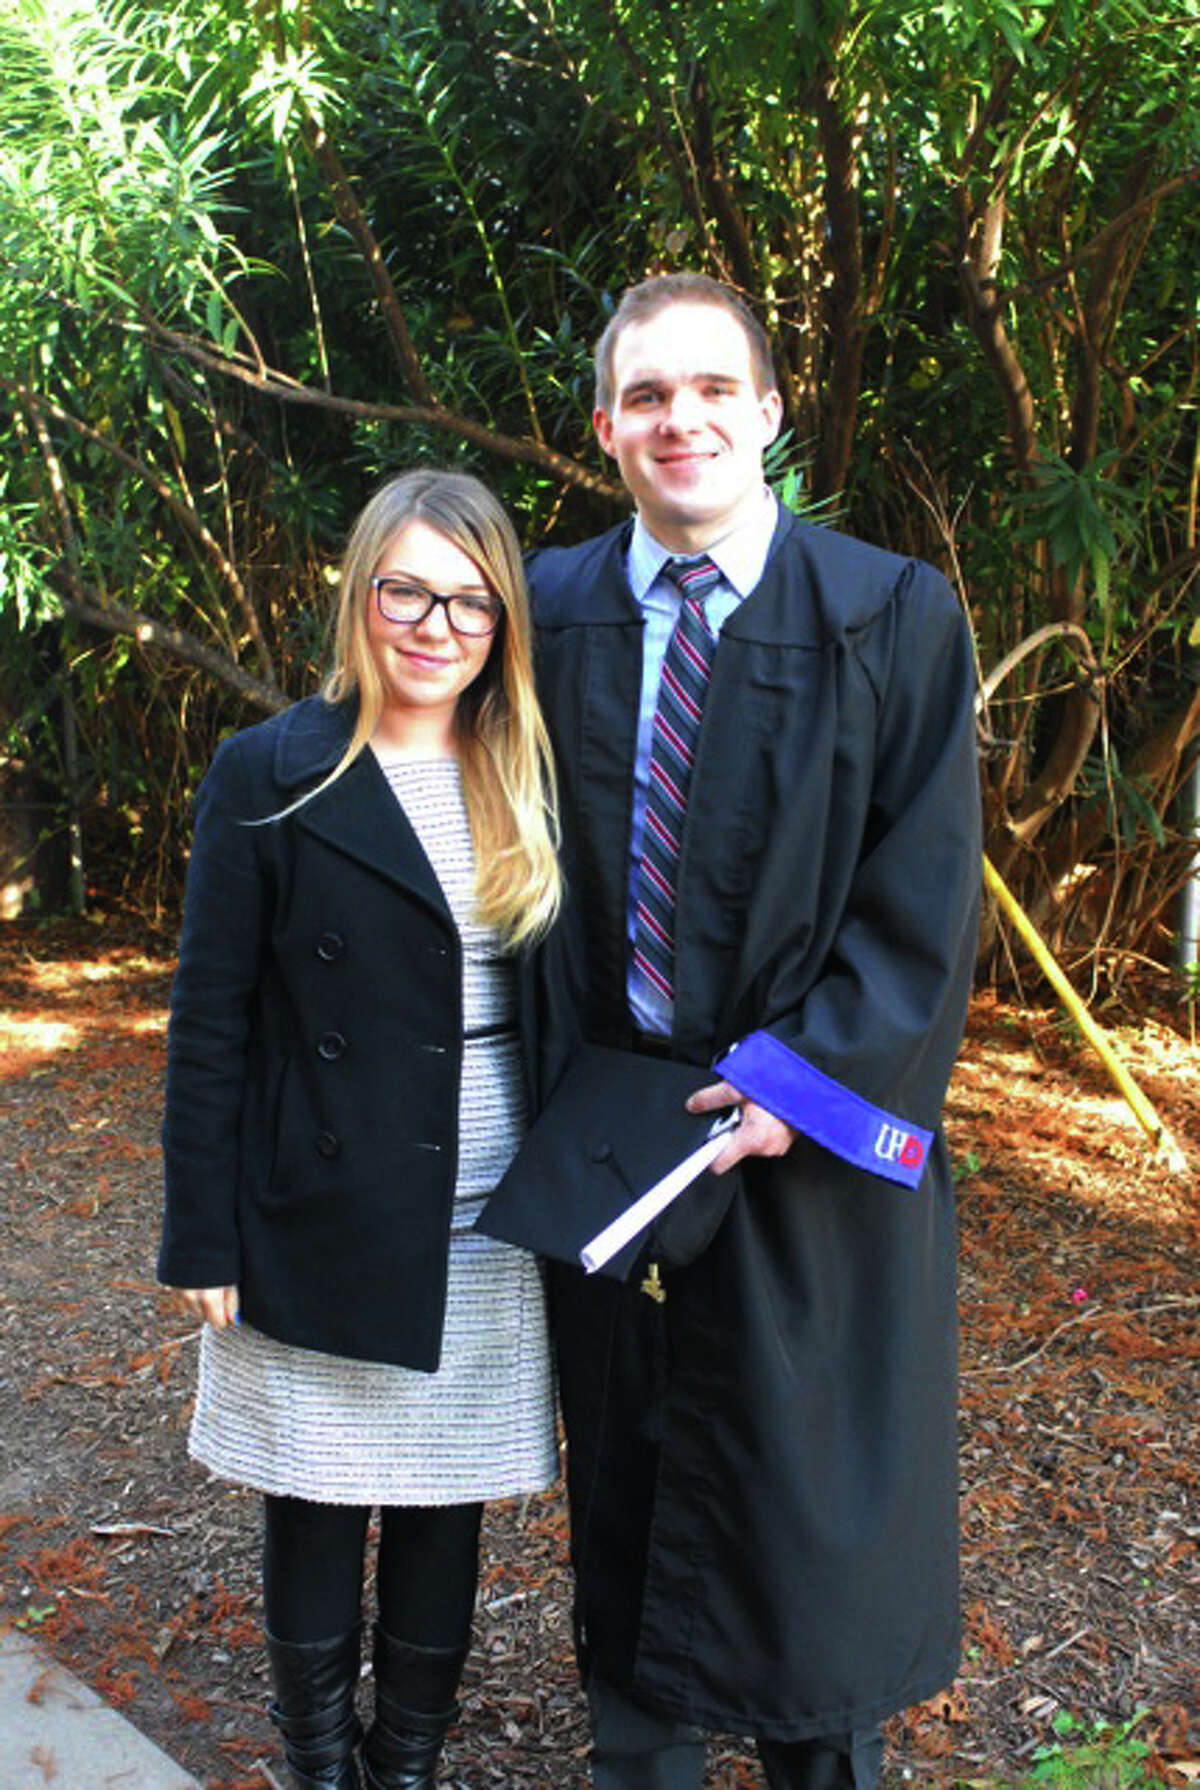 Natalie Plummer and Ryan McConnell say the university failed to give them due process.